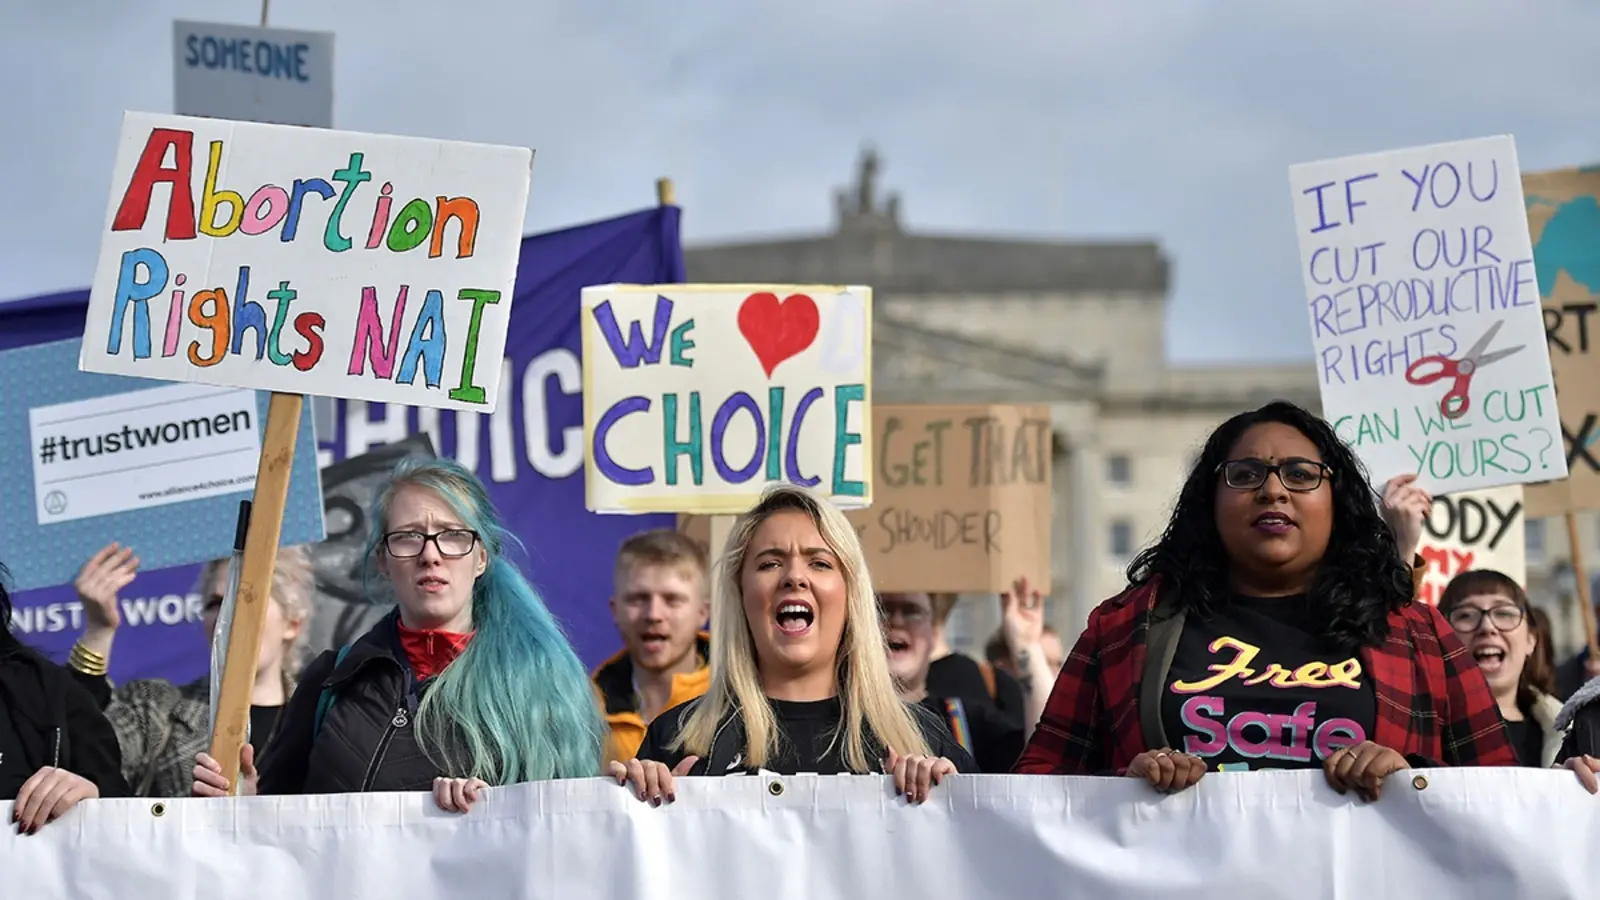 Members of a pro-choice group protest in Belfast, Northern Ireland, in October 2019.